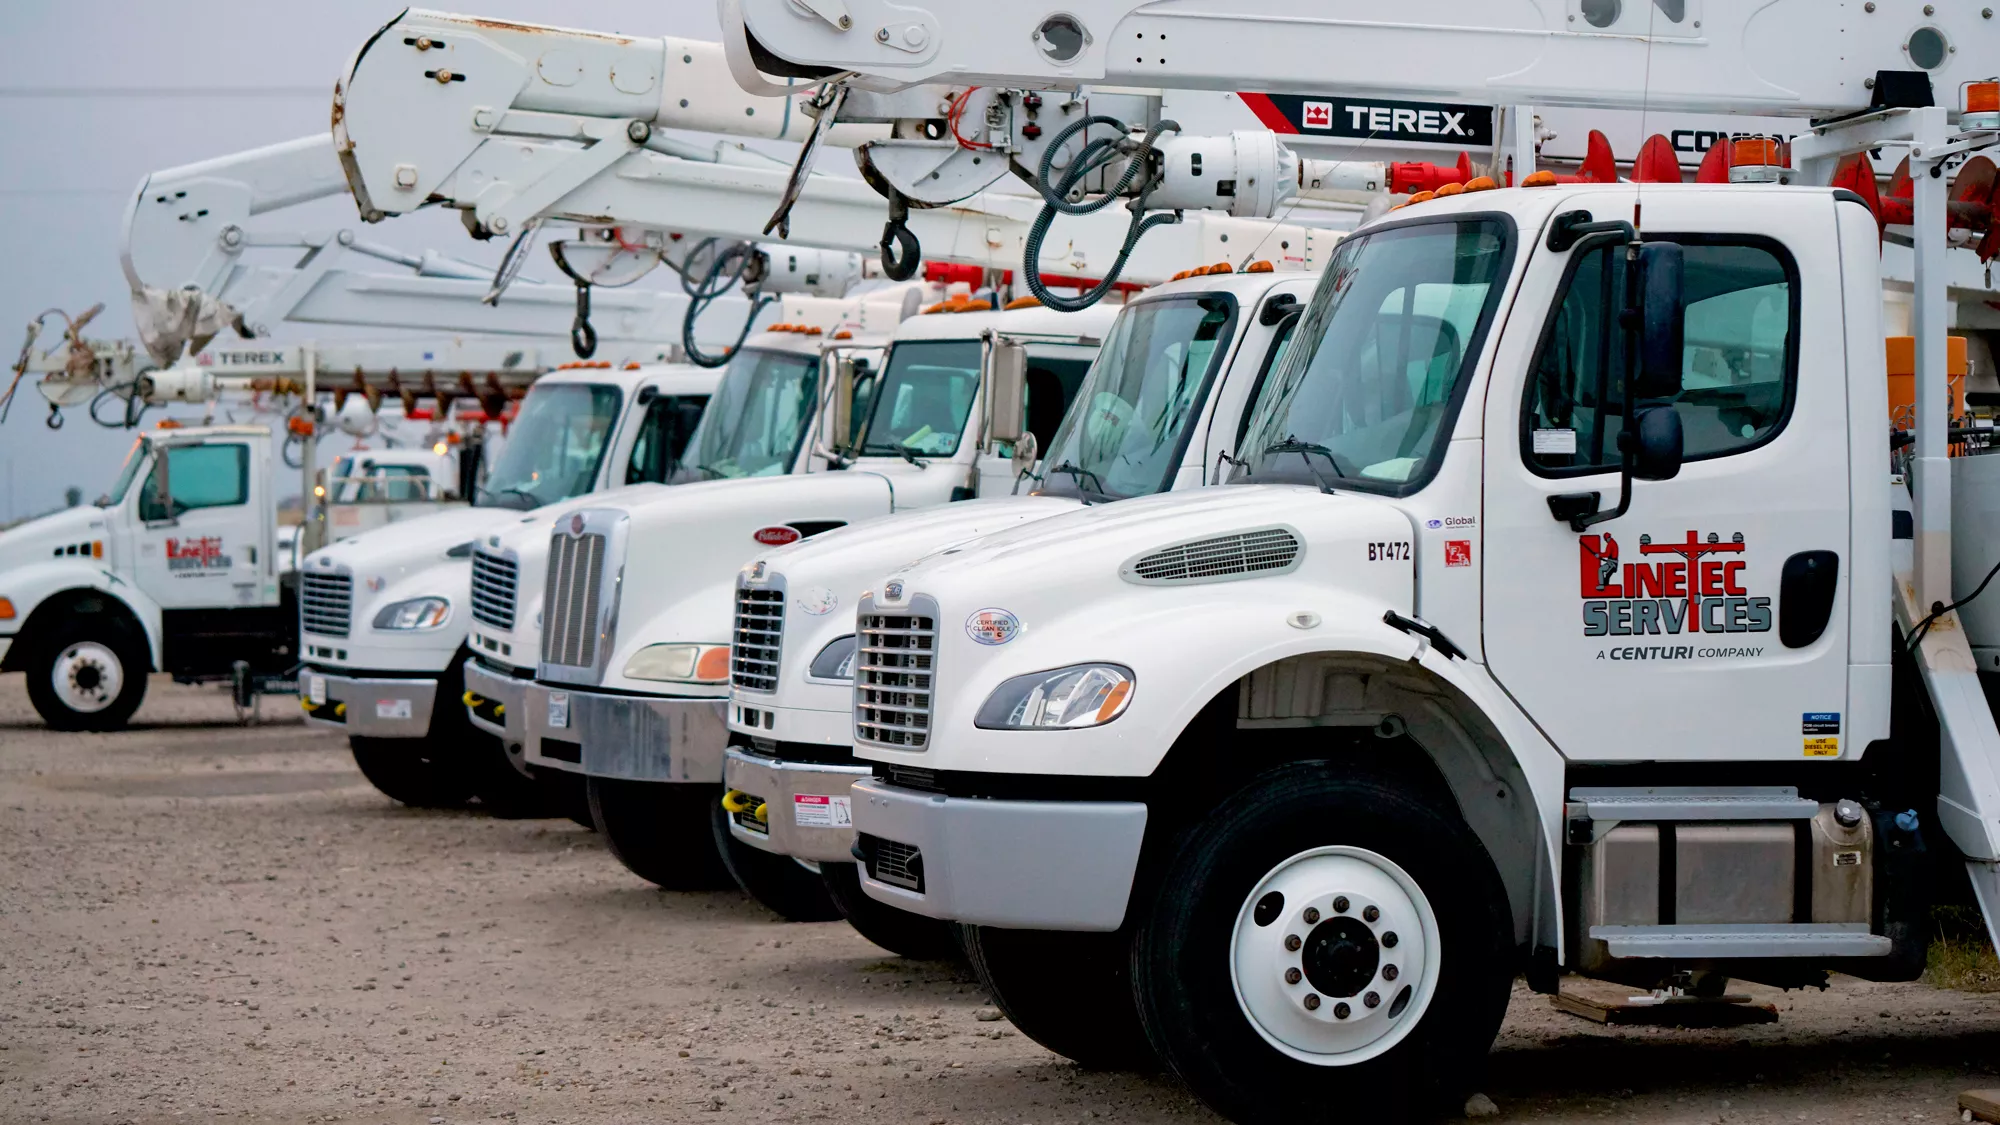 A feet of Linetec vehicles stand ready in Corpus Christi, Texas.